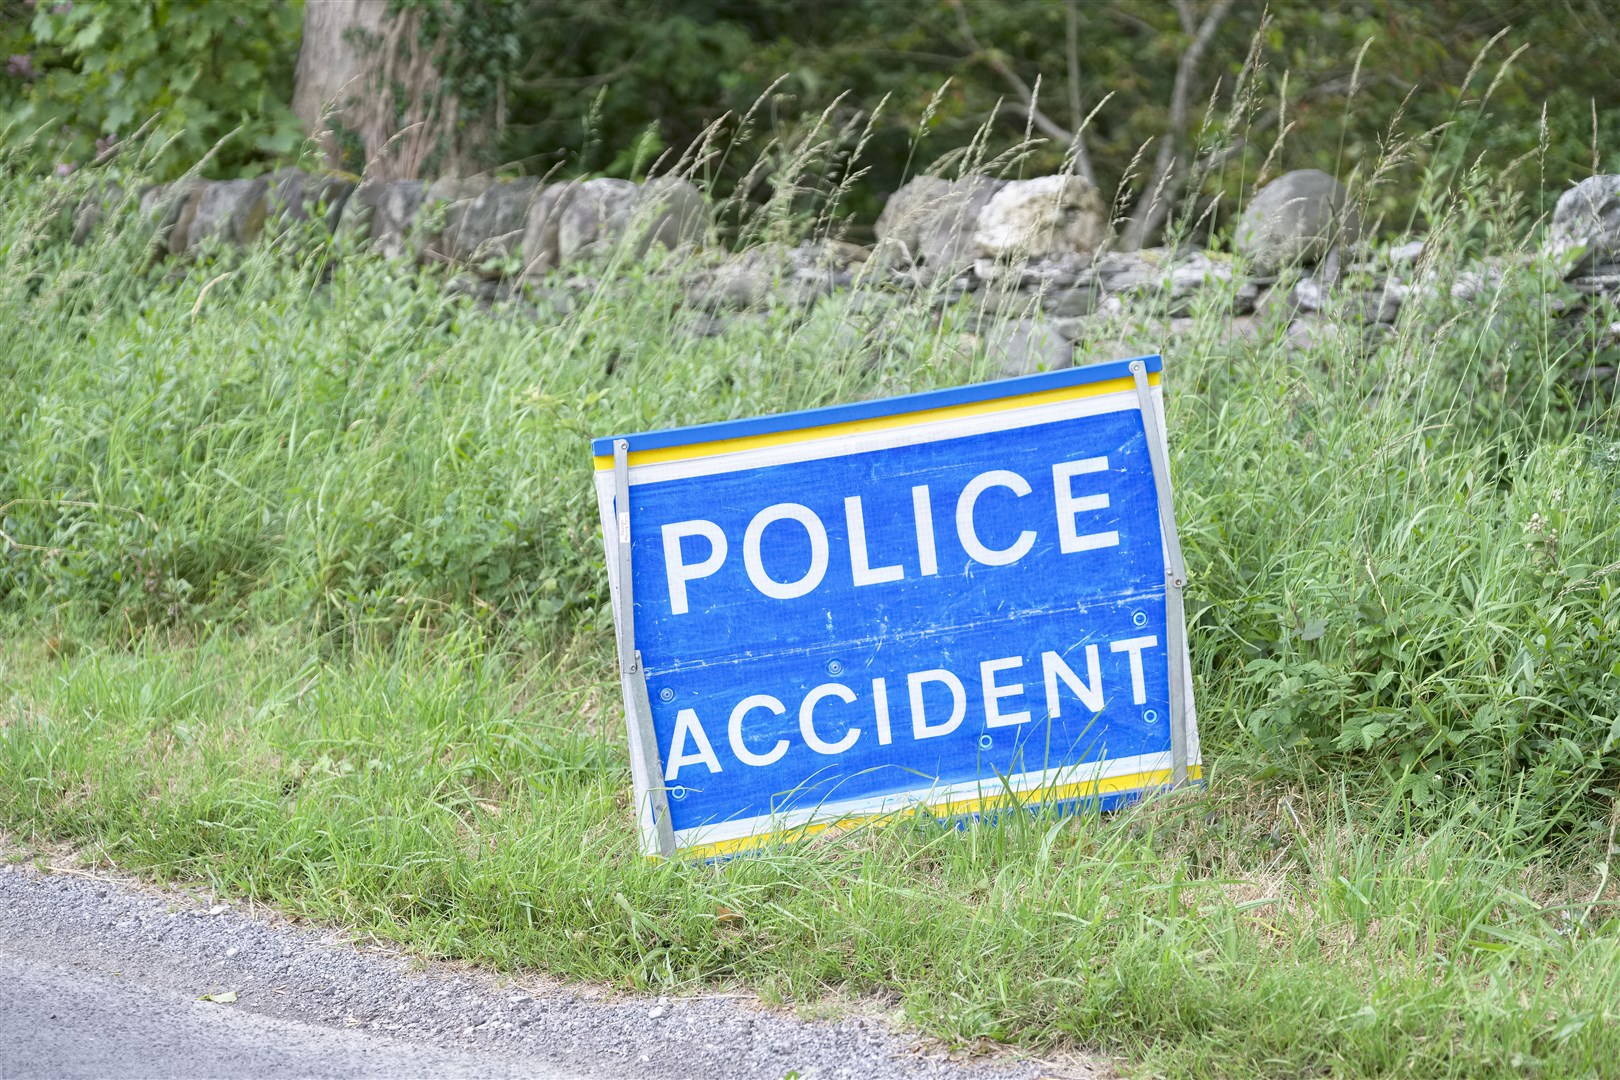 A 39-year-old woman has been taken to hospital following a crash on the A9.